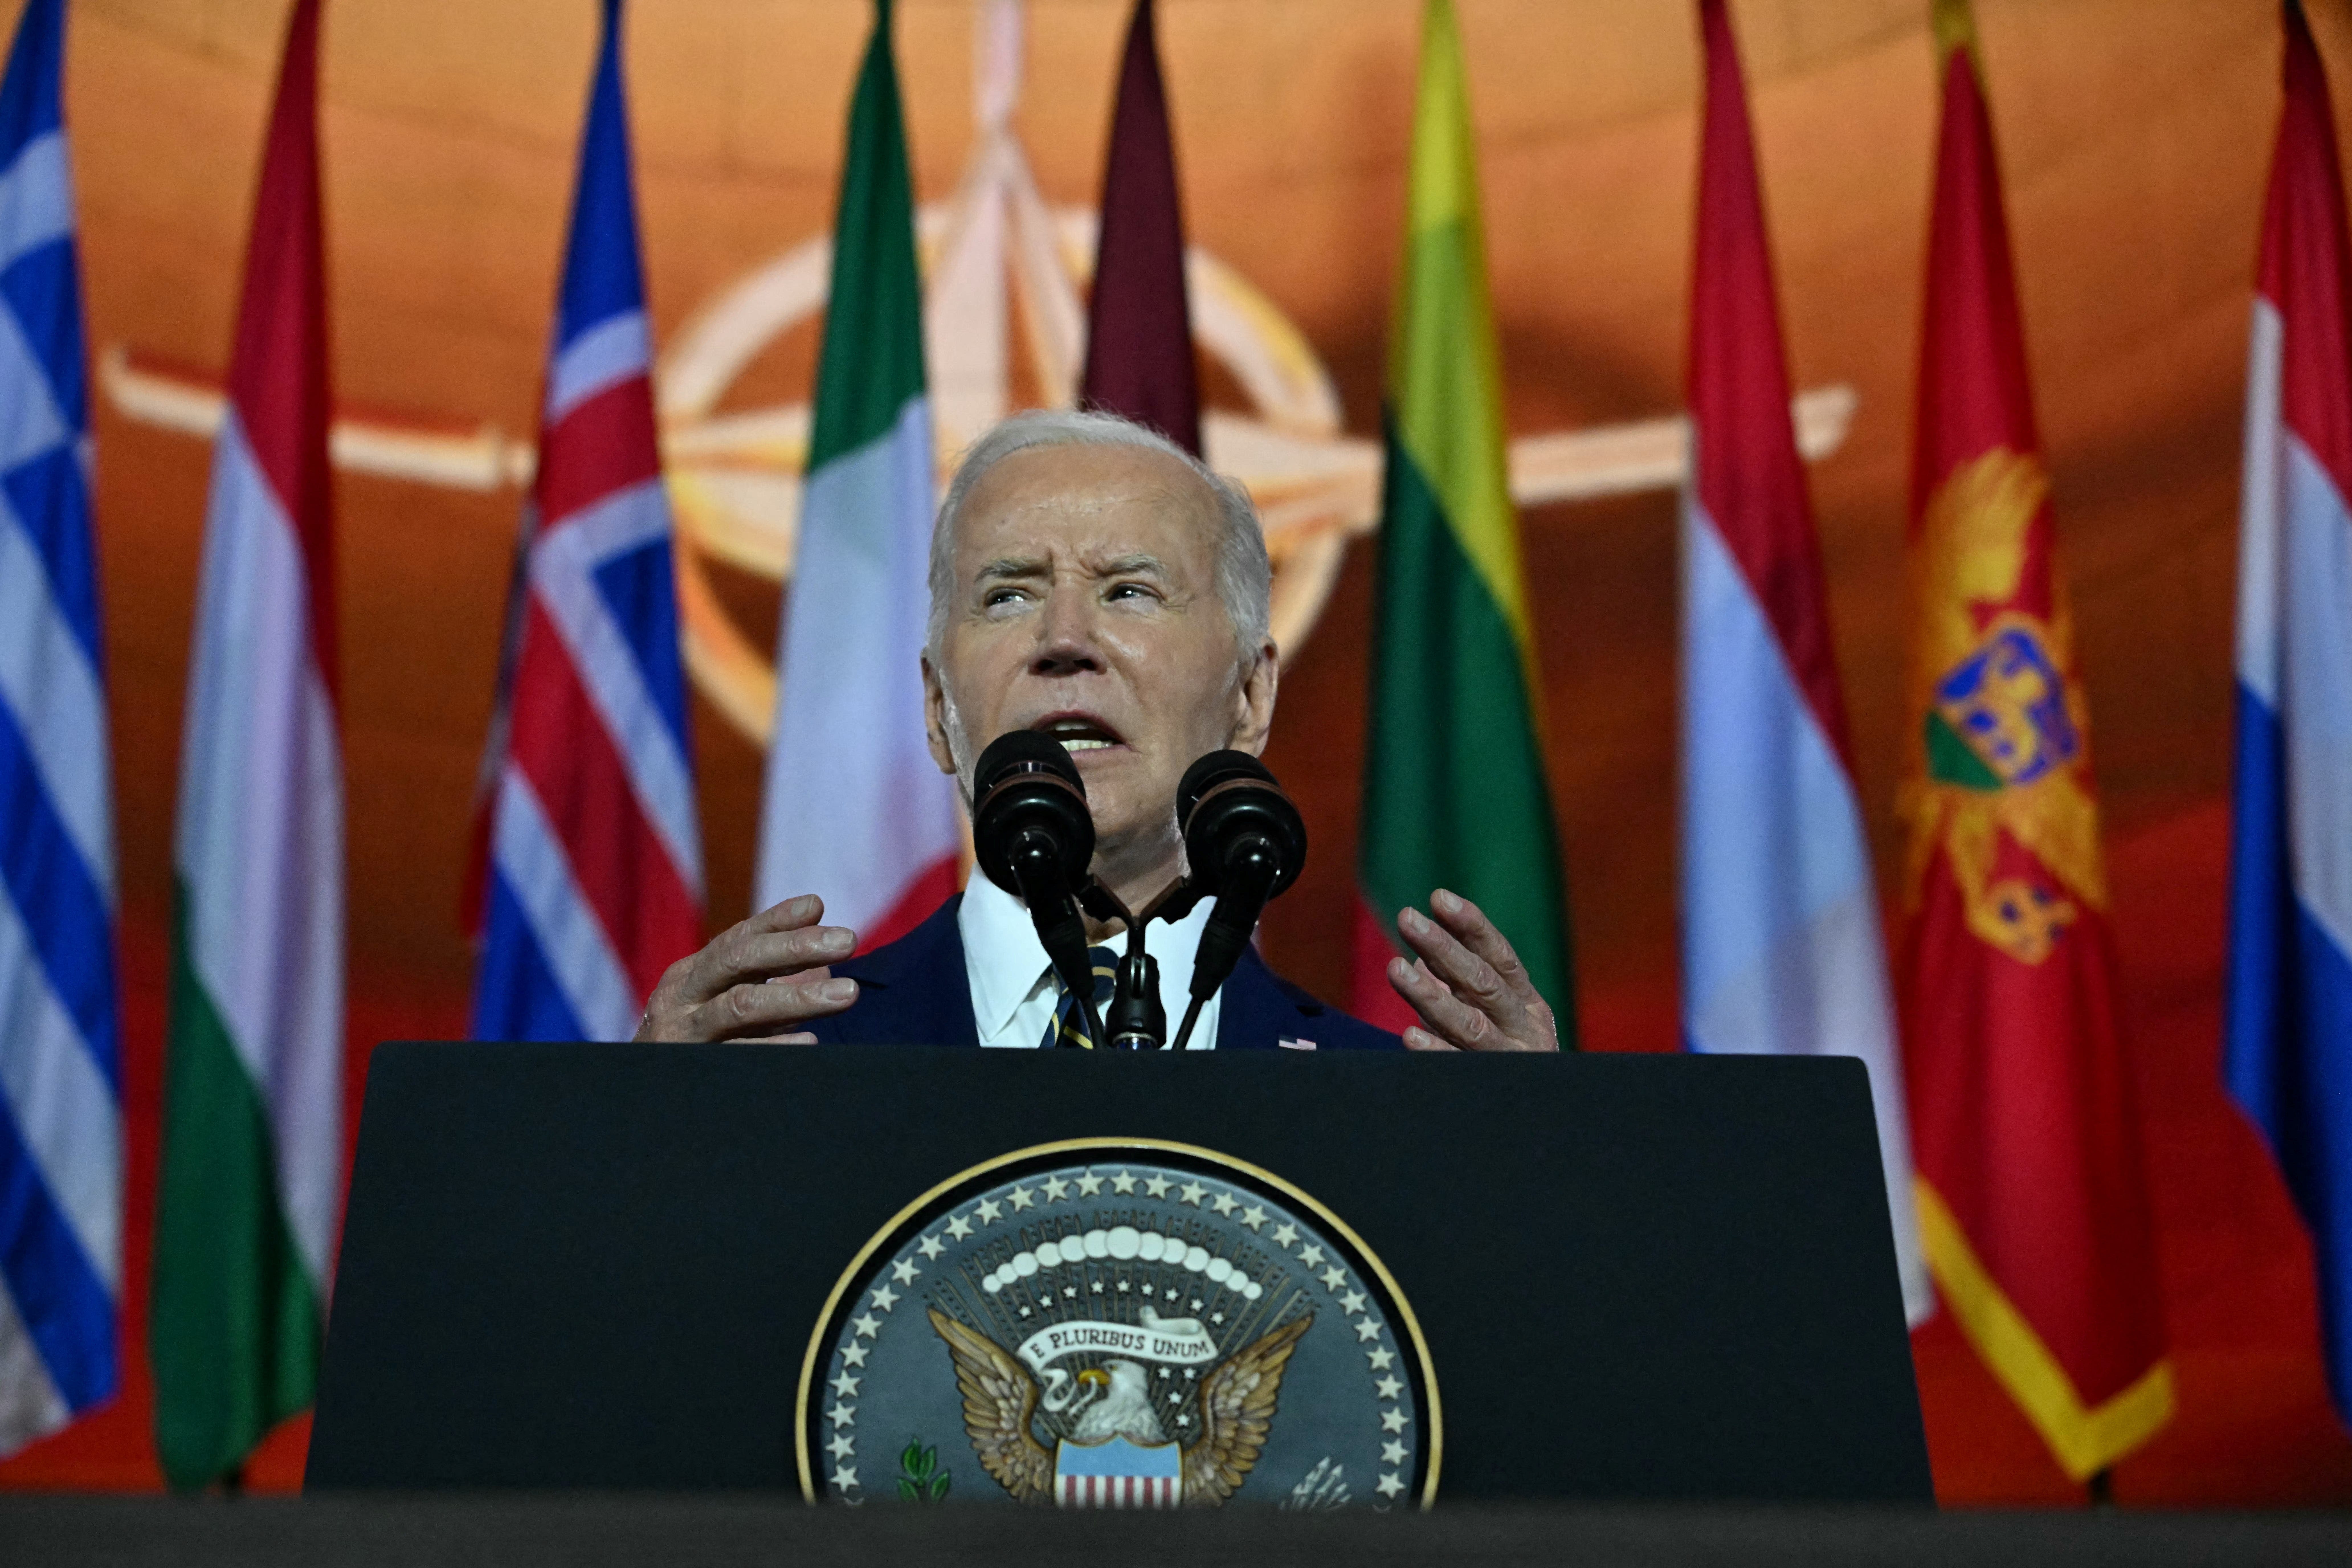 Joe Biden’s Mostly True claim about growth of NATO countries hitting 2% of GDP on defense